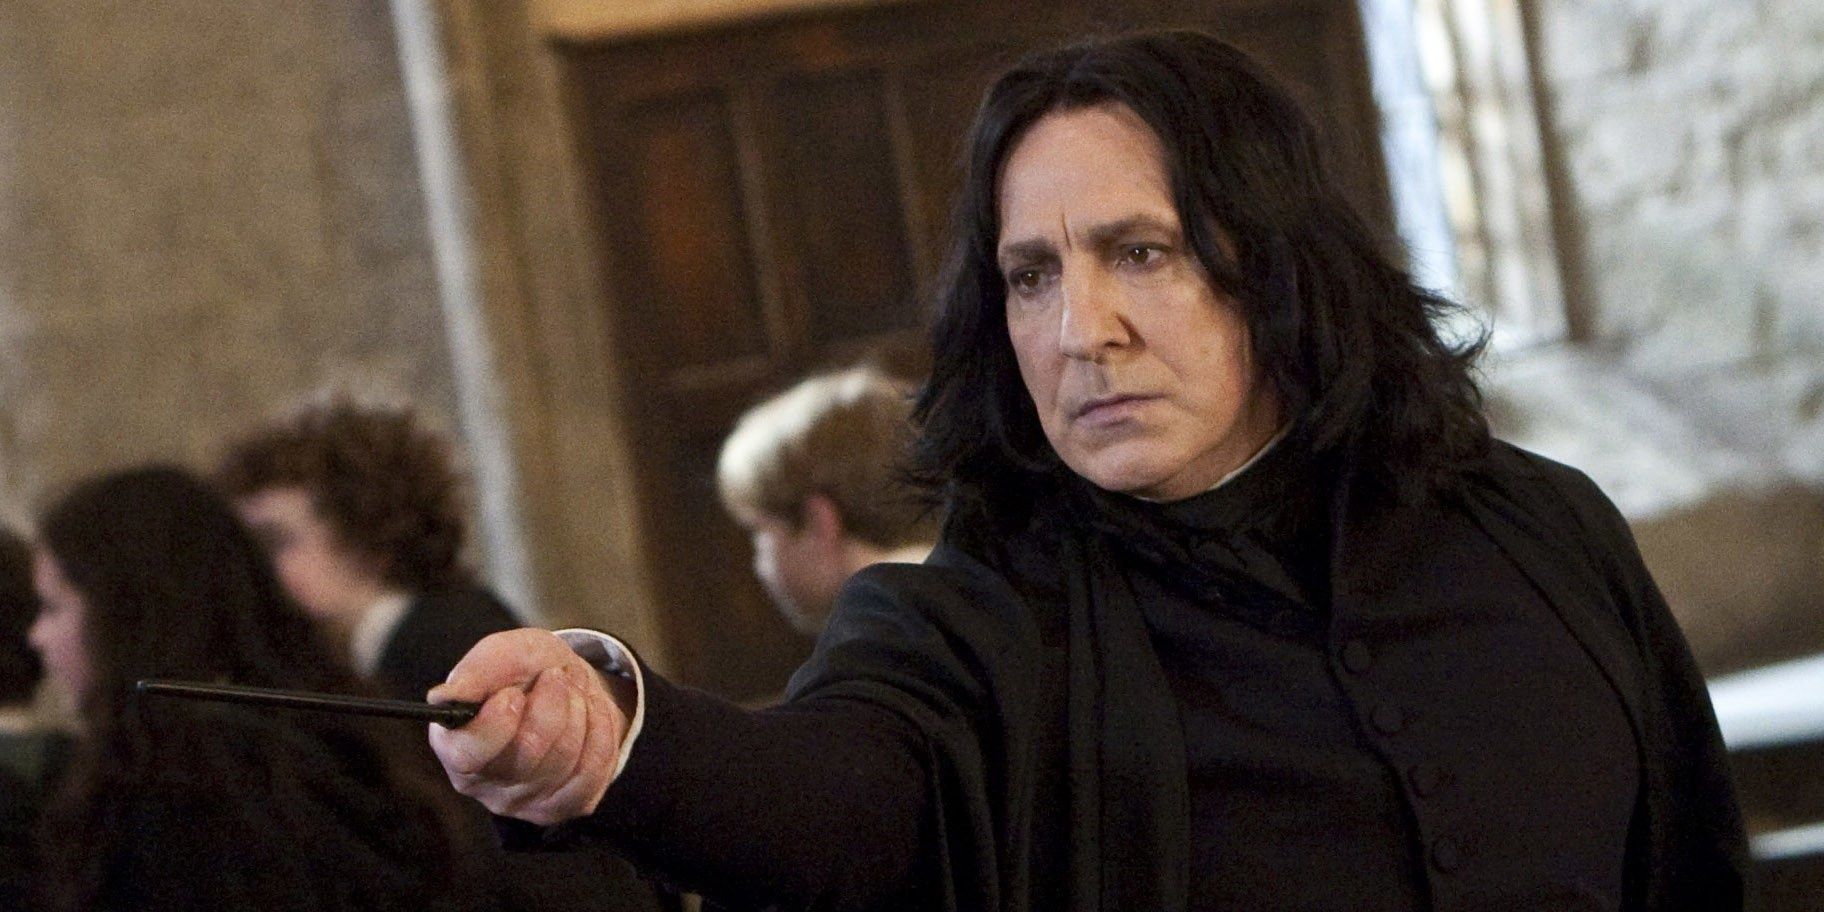 Harry Potter 10 Snape Mannerisms From The Books Alan Rickman Nails